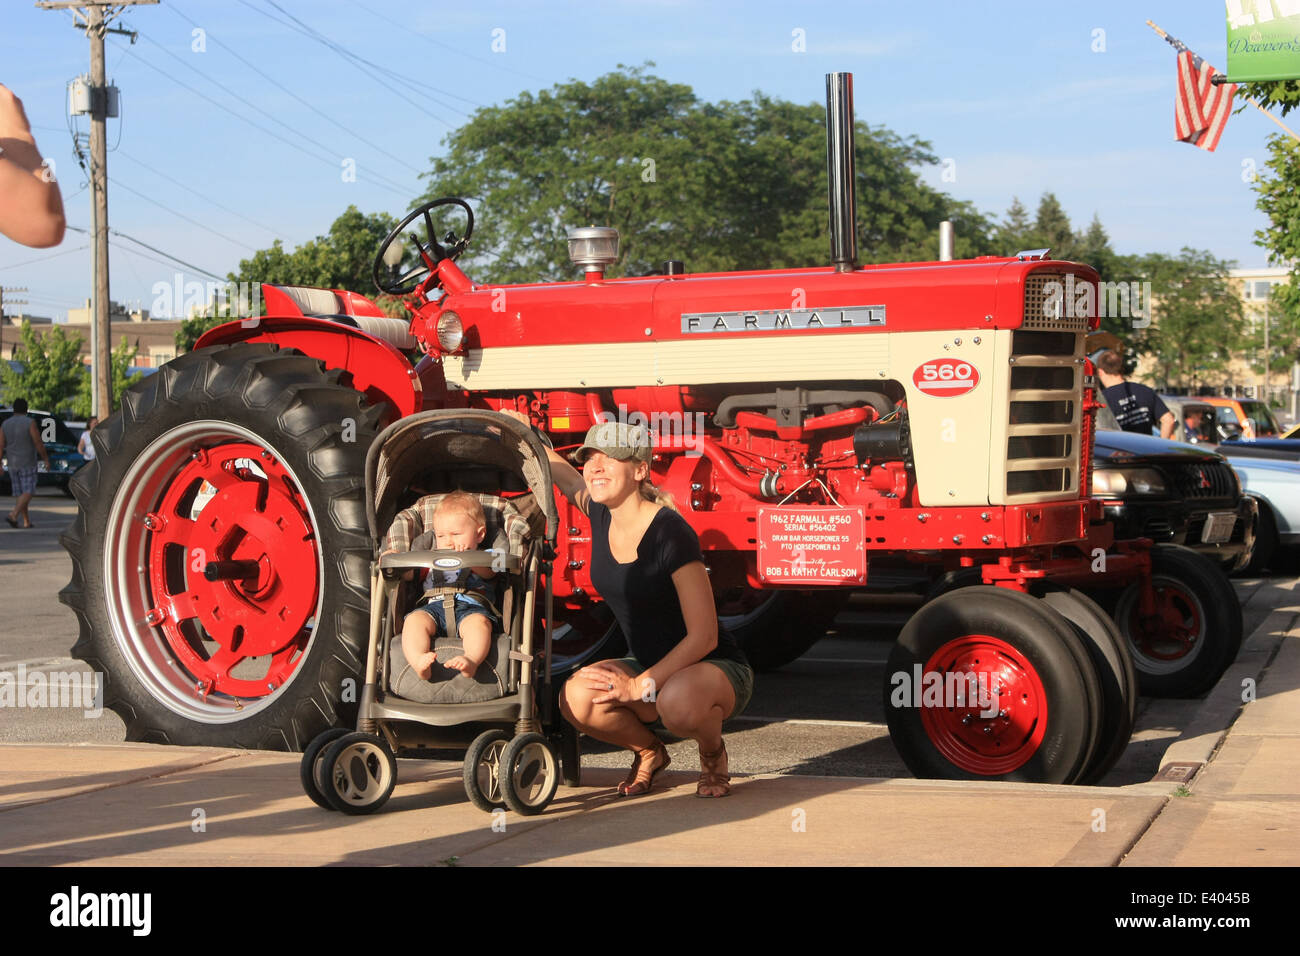 Downers Grove (Illinois) Car Show, June 09, 2012, 9:17 AM. FARMALL tractor and a young family Stock Photo